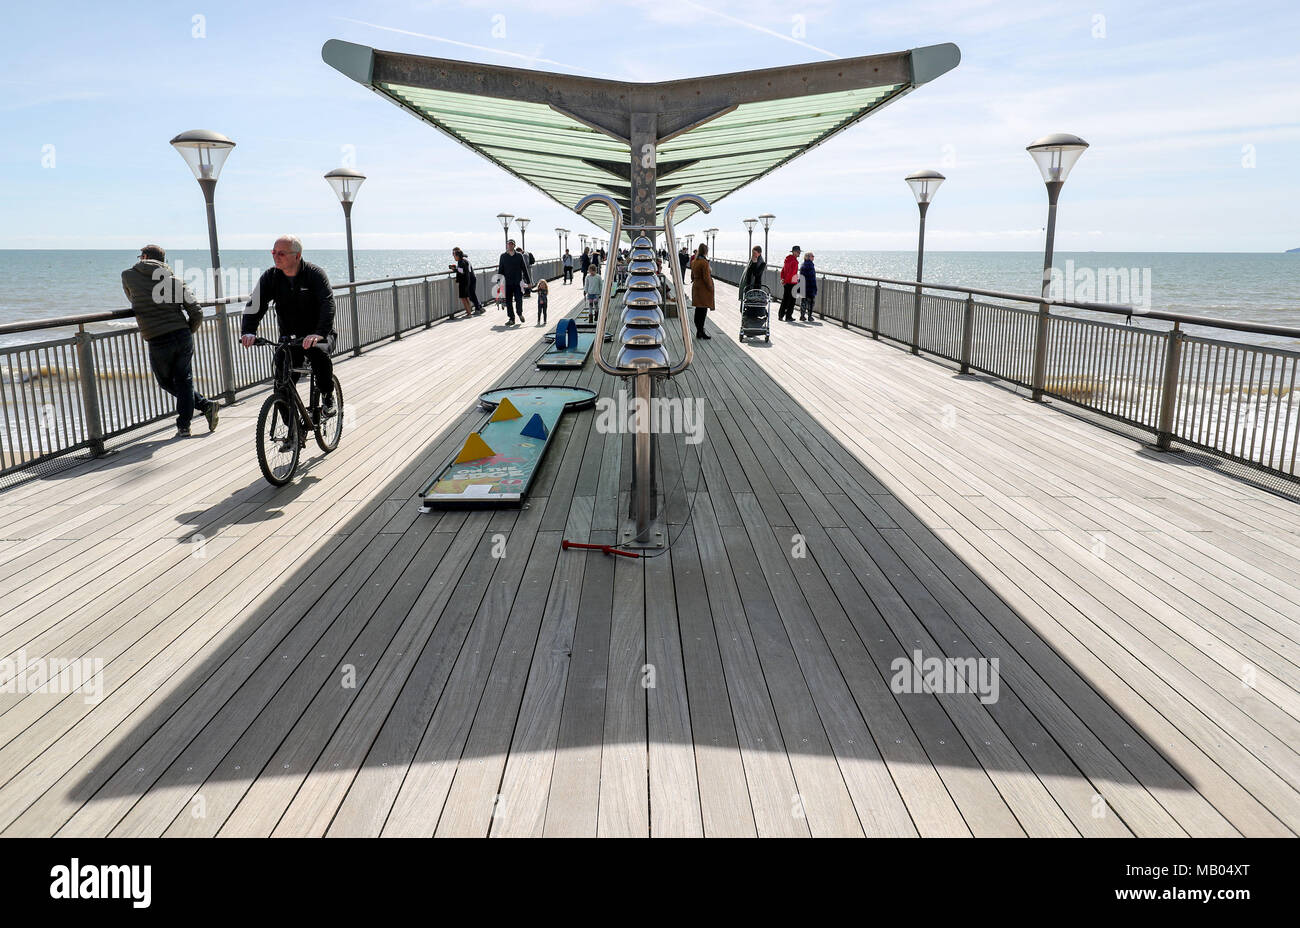 People enjoy the sunny weather on Boscombe pier in Bournemouth, Dorset. Stock Photo